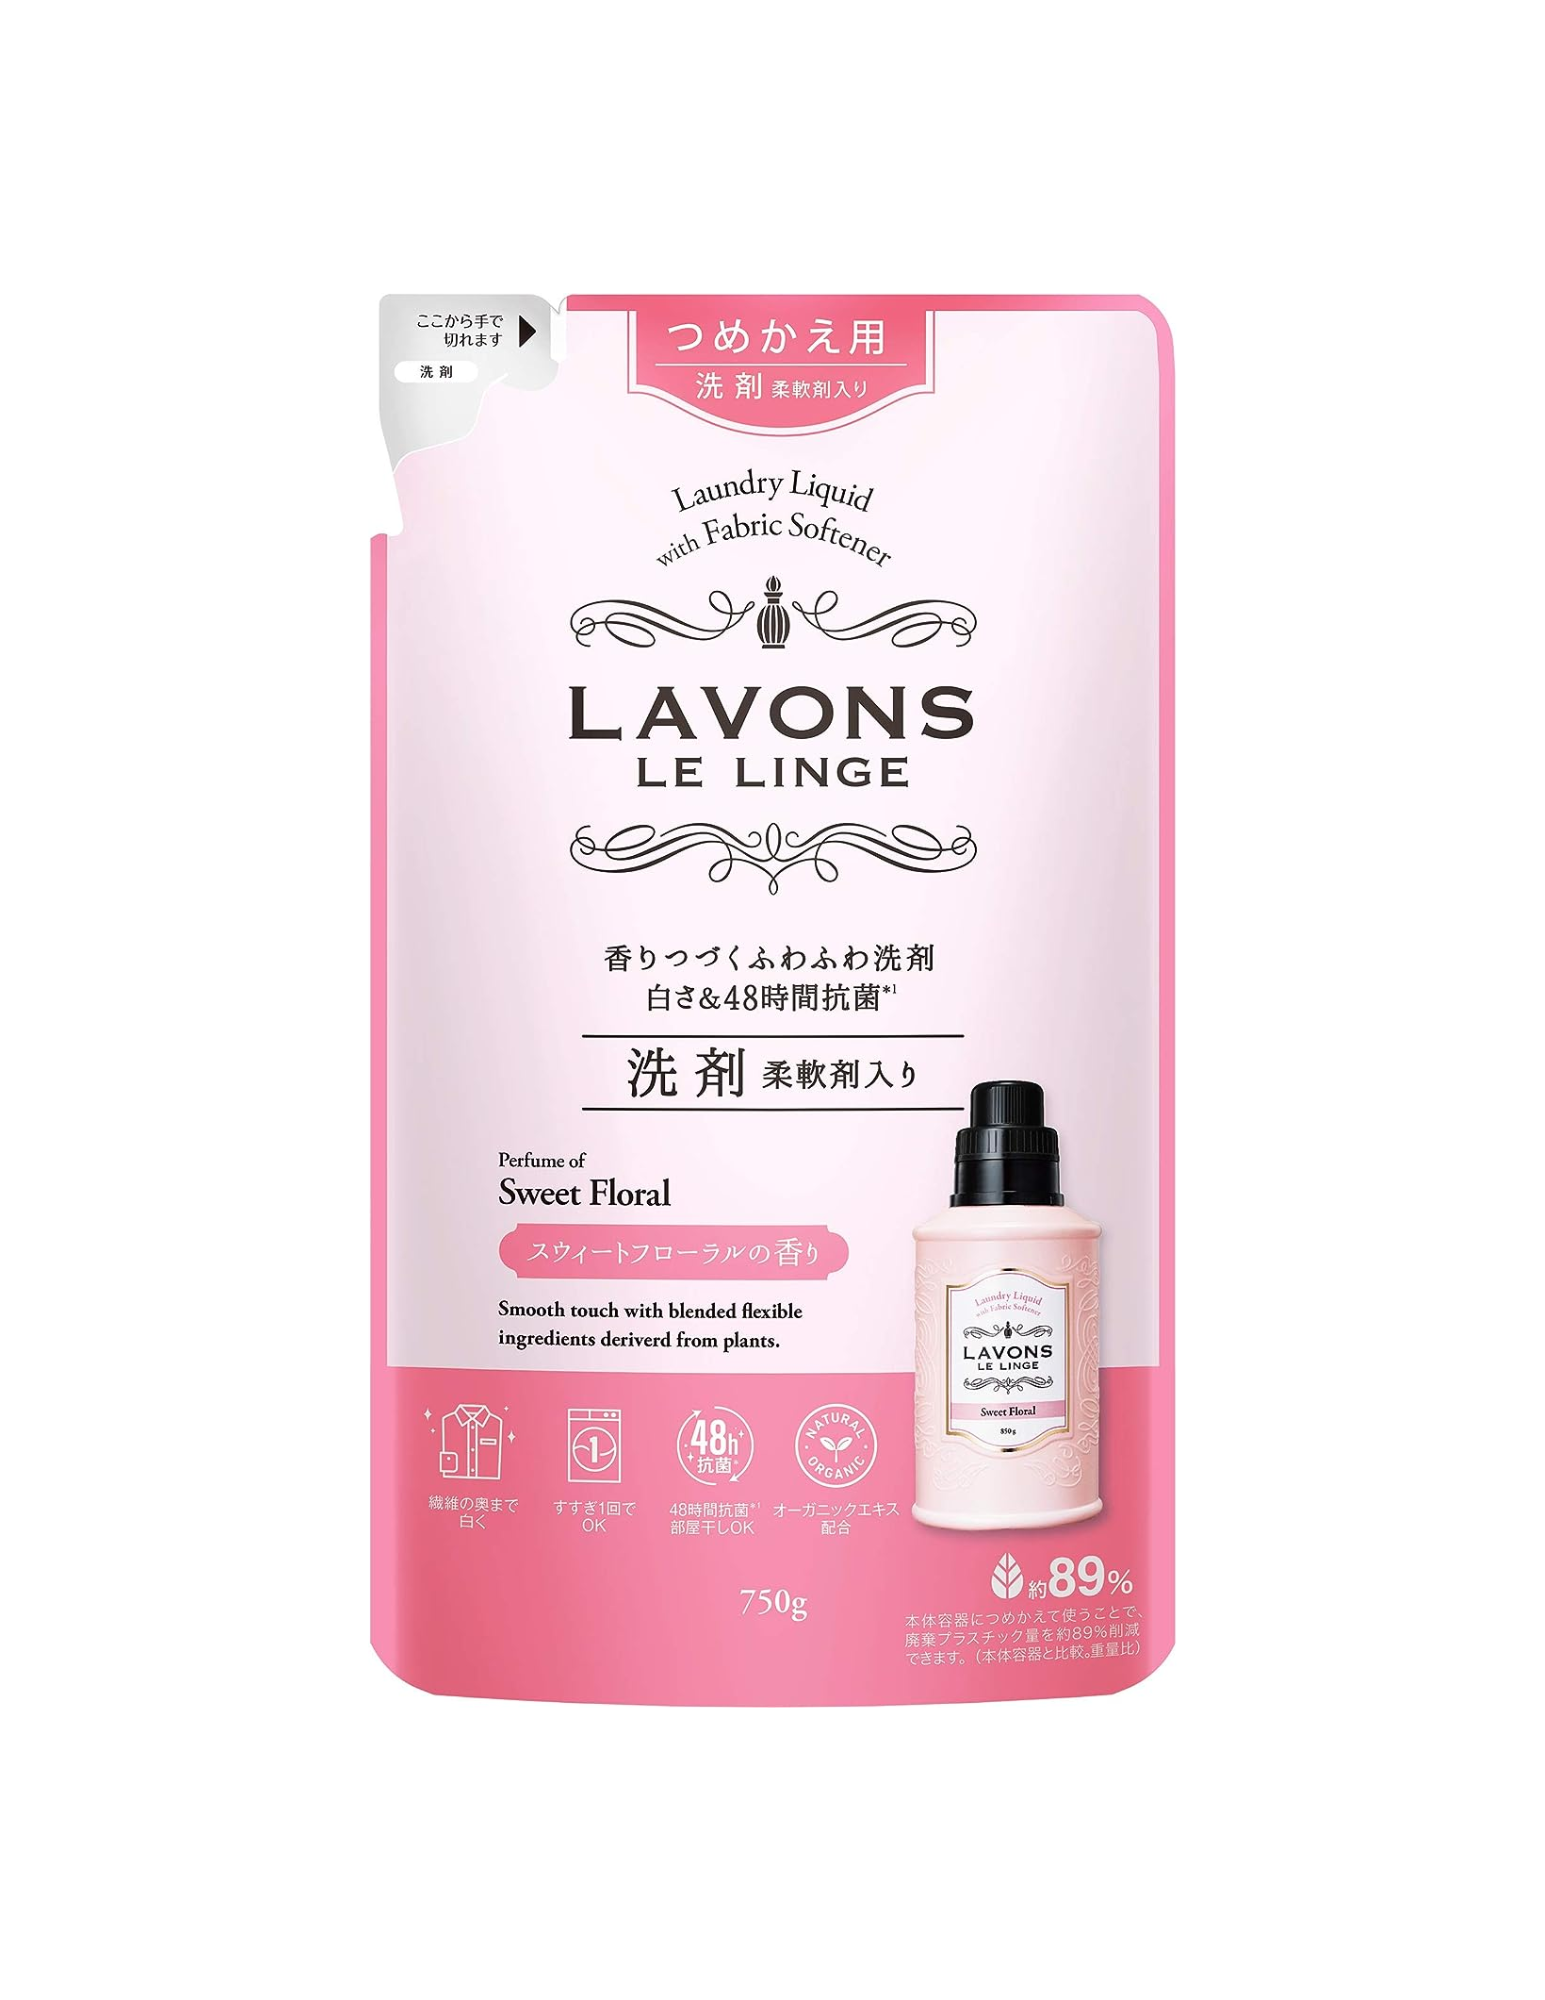 Lavons Laundry Liquid with Fabric Softener | Refill Sweet Floral